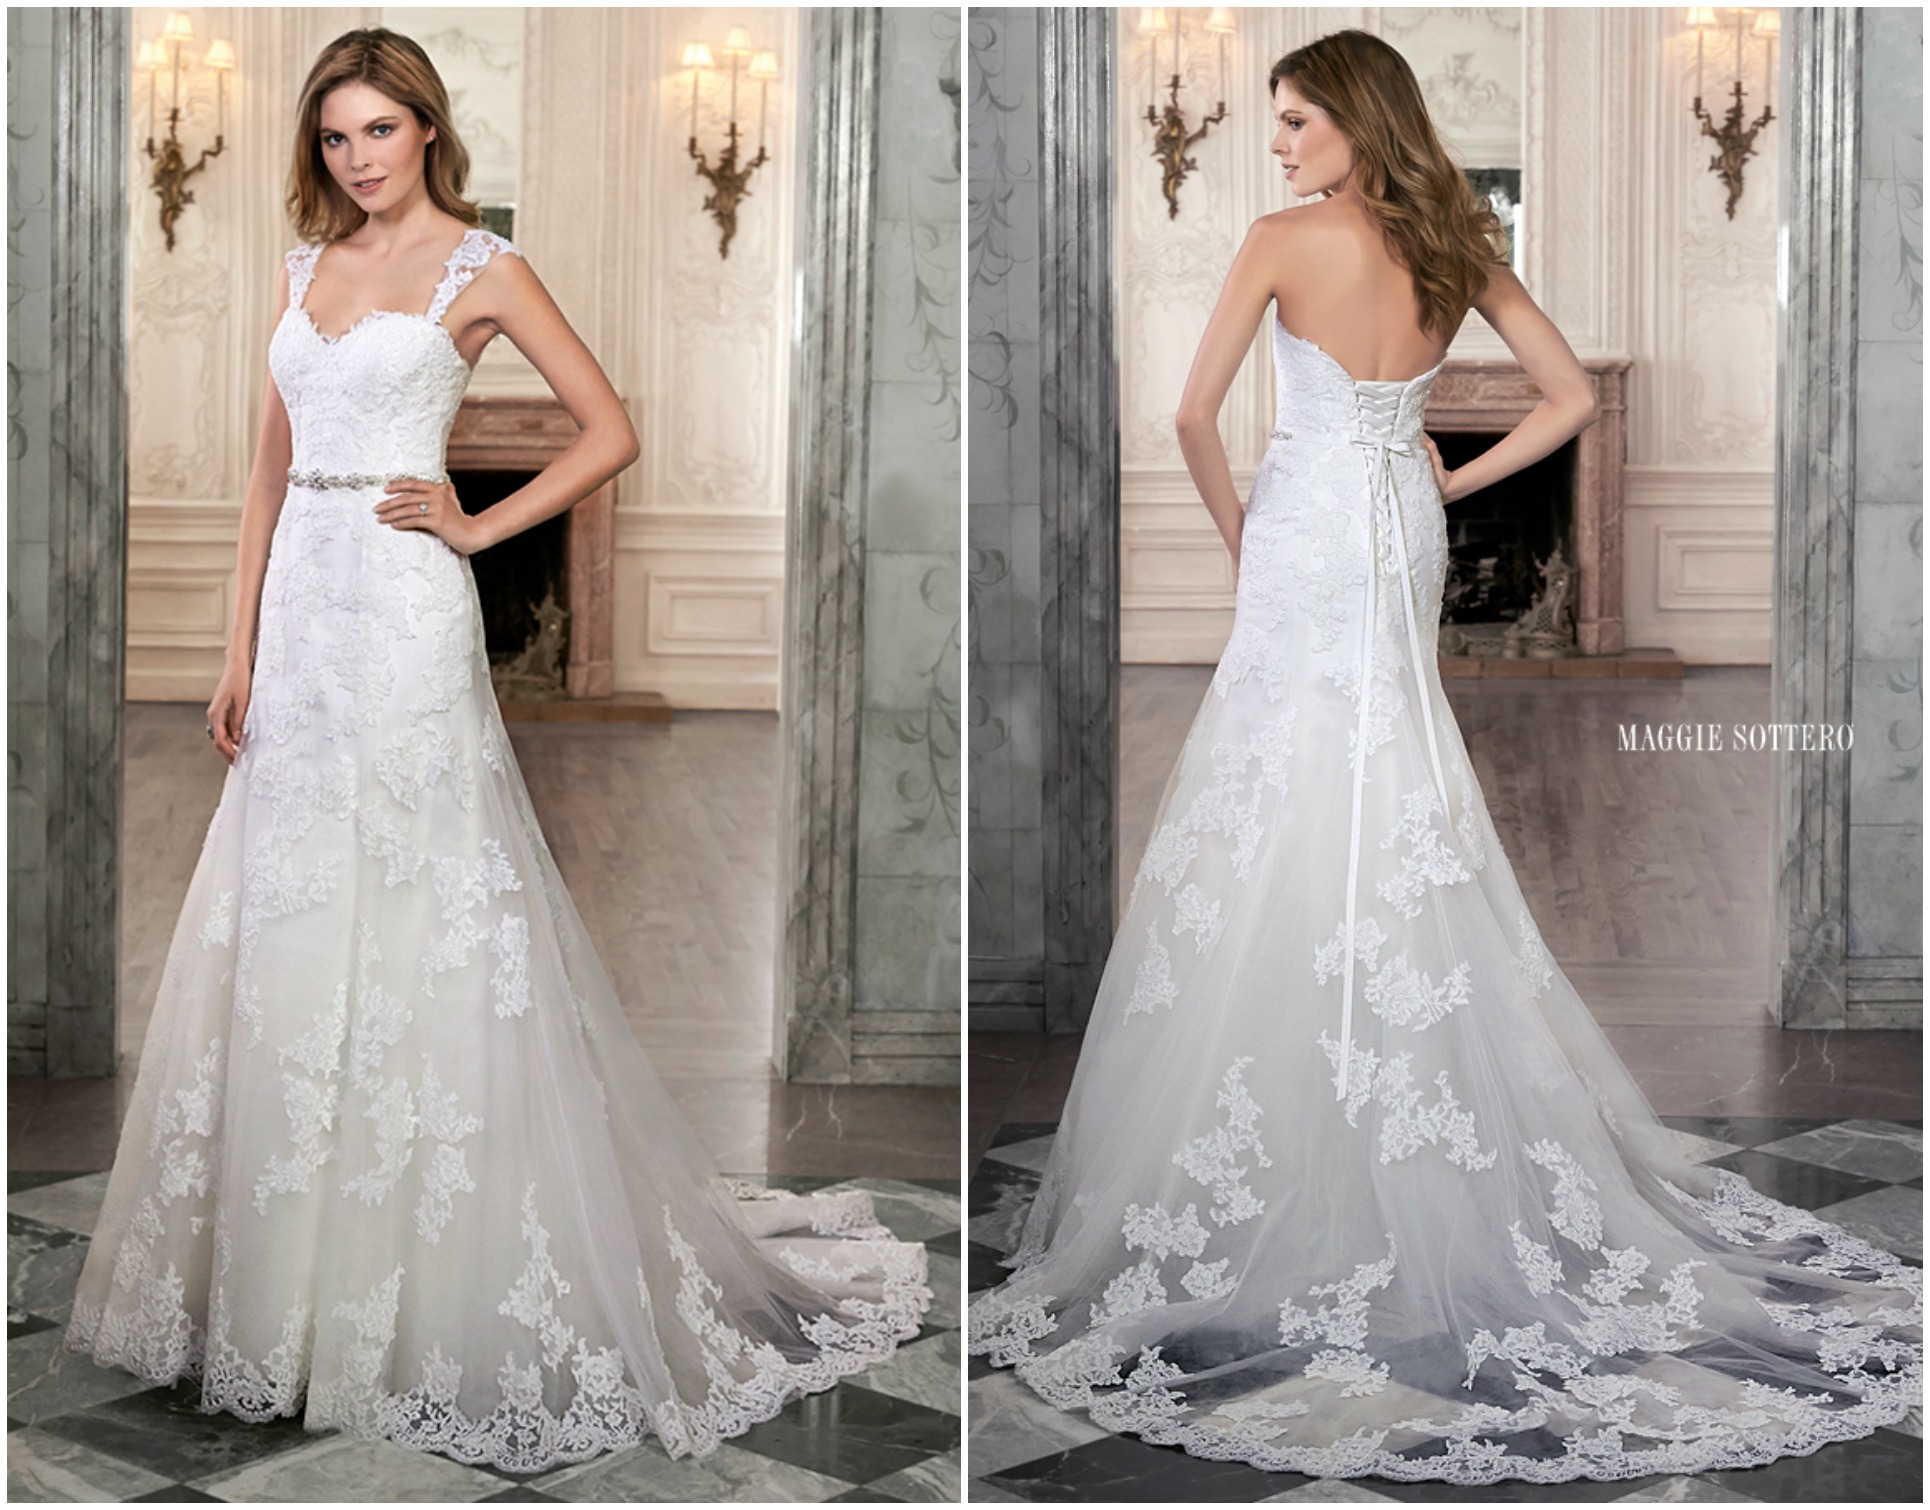 <a href="http://www.maggiesottero.com/dress.aspx?style=5MW071&amp;page=0&amp;pageSize=36&amp;keywordText=&amp;keywordType=All" target="_blank">Maggie Sottero</a>